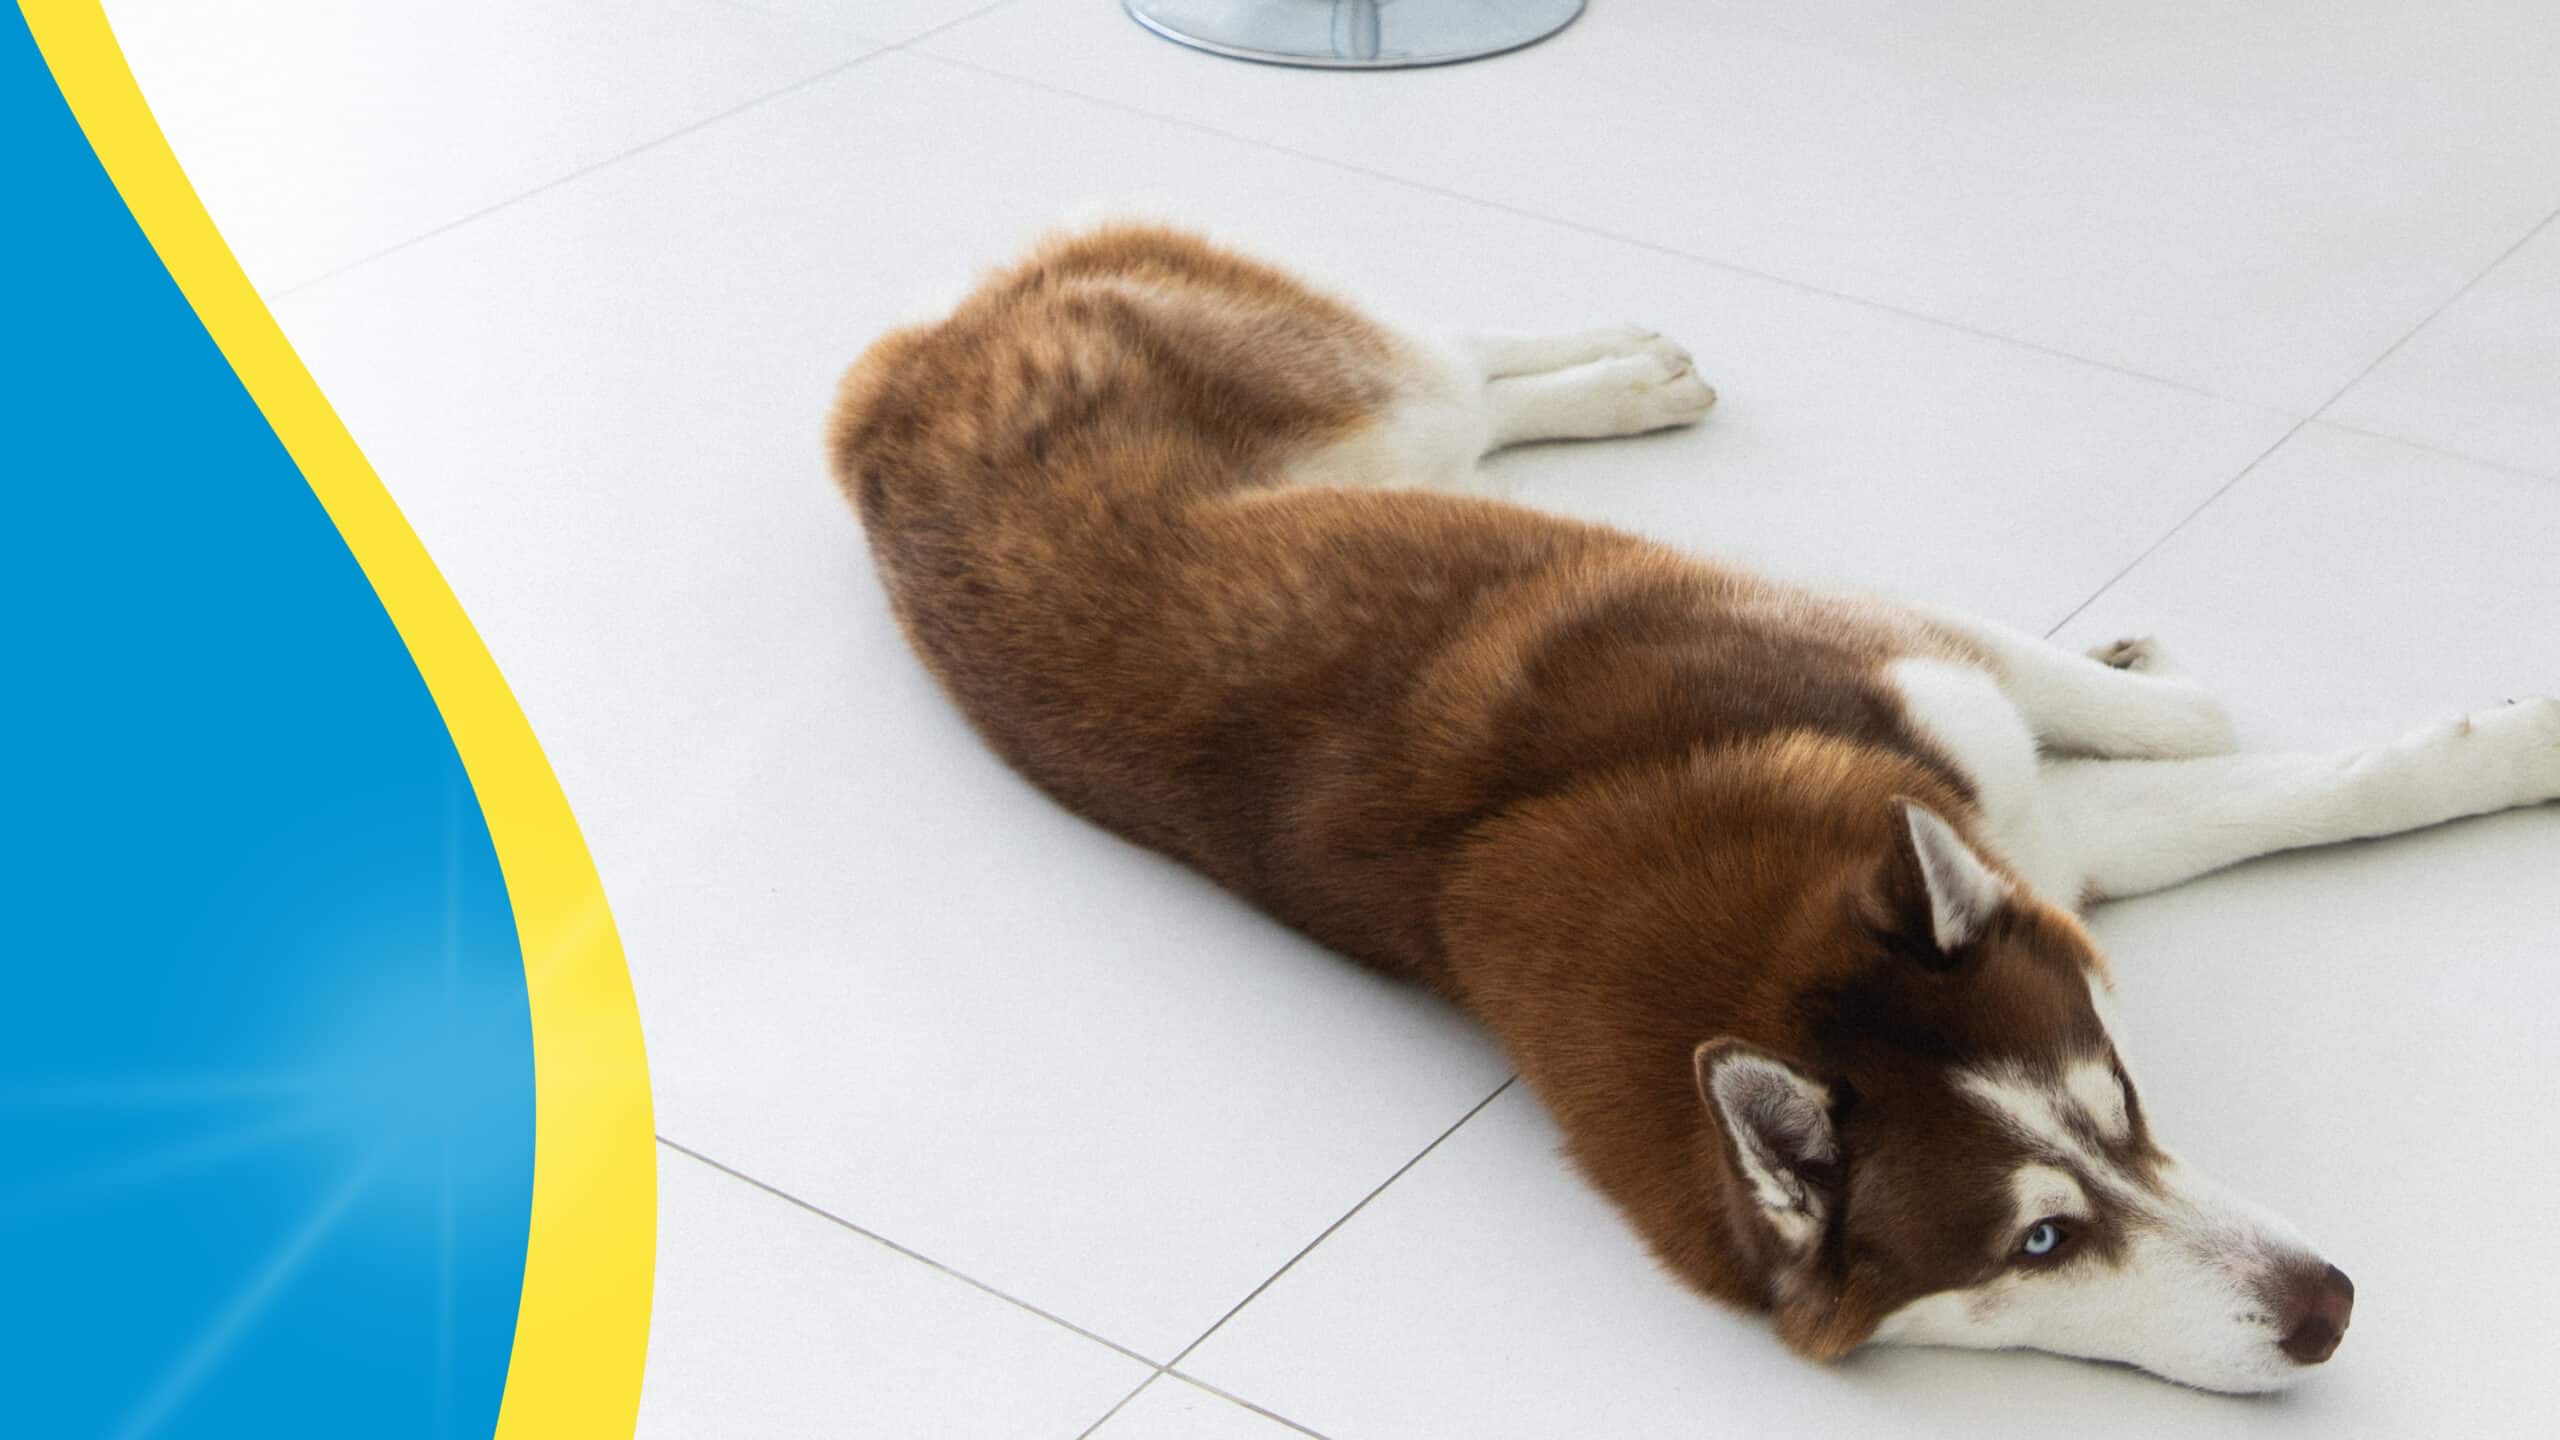 Simple Scrub is safe for cleaning around animals, like this husky dog lying on a linoleum floor.